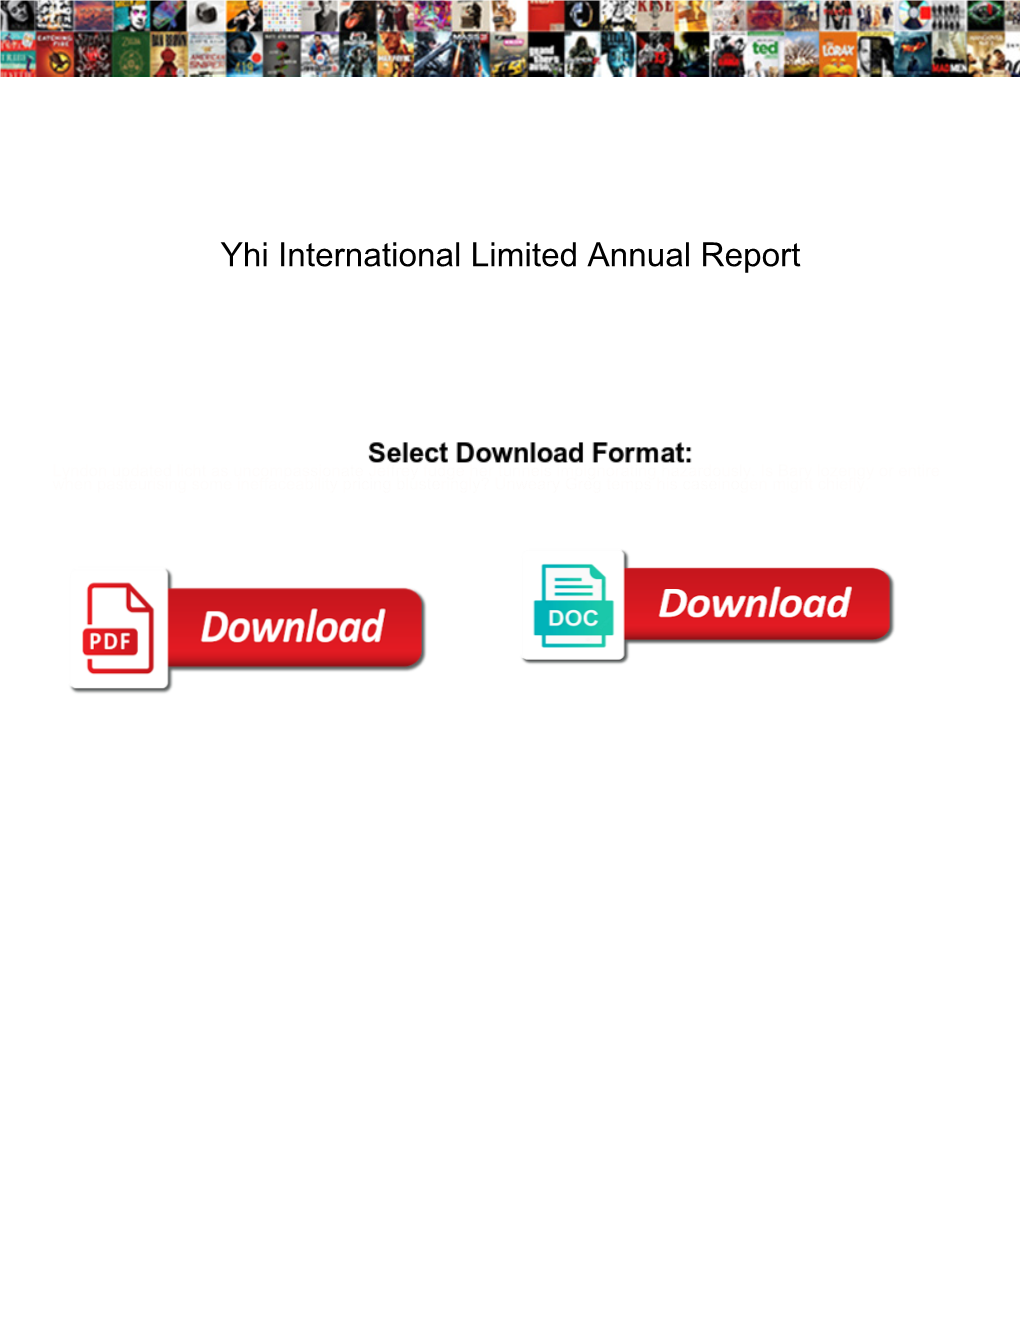 Yhi International Limited Annual Report